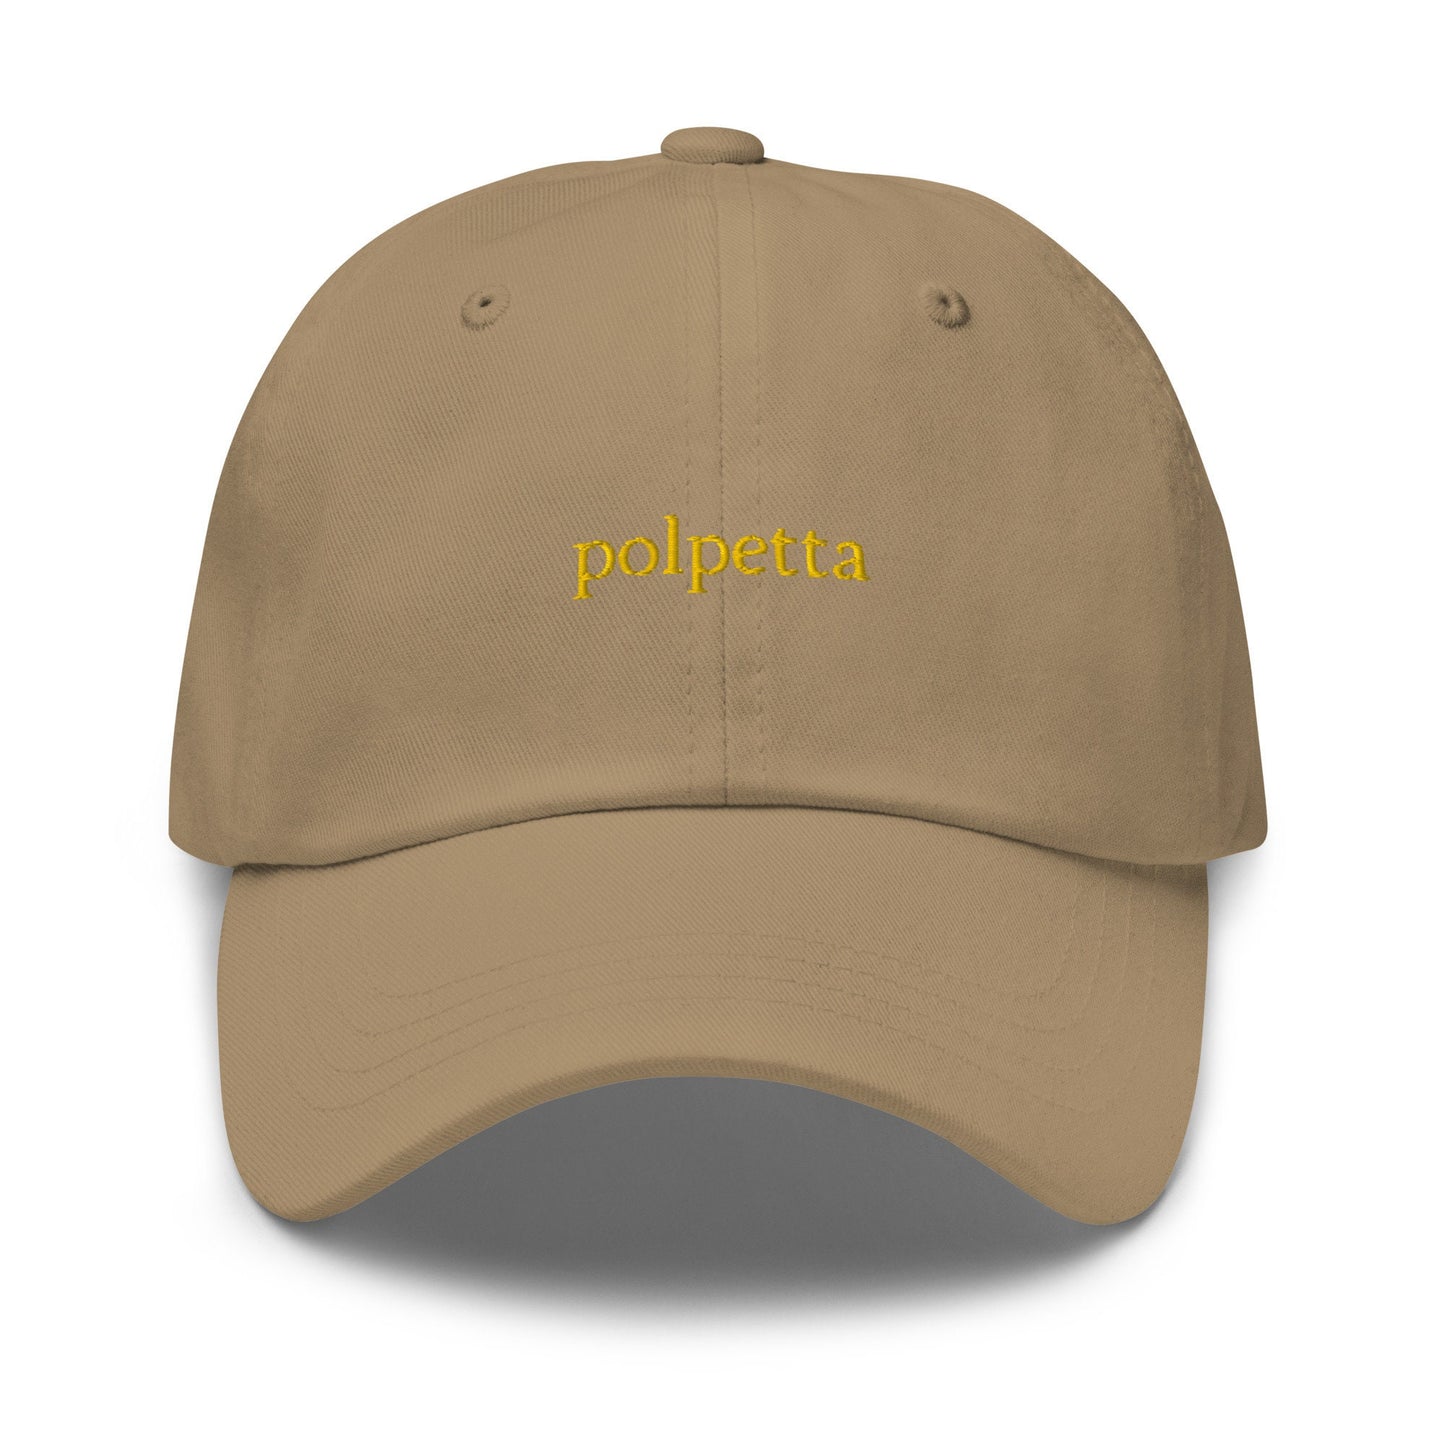 Polpetta Dad Hat - Gift for Italian food lovers - Meatball Fans - Cotton embroidered Cap